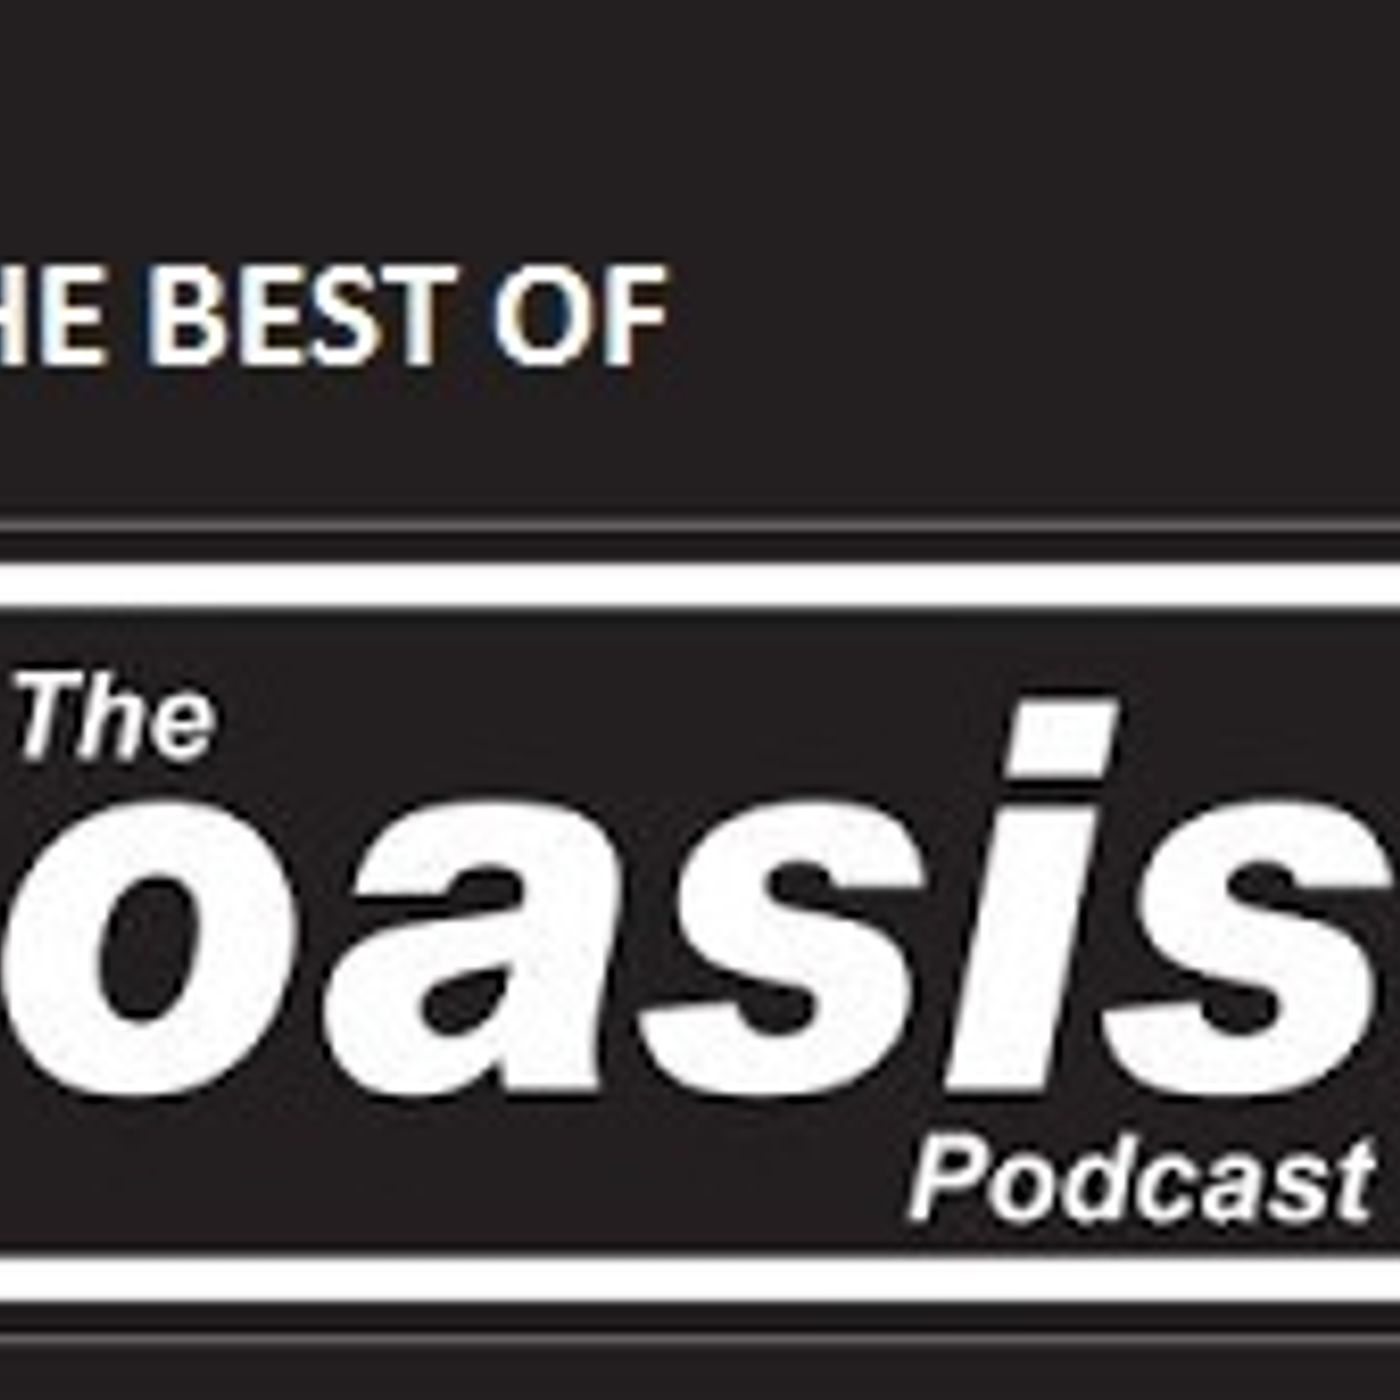 52: Best of Oasis Podcast - Episodes 16-23